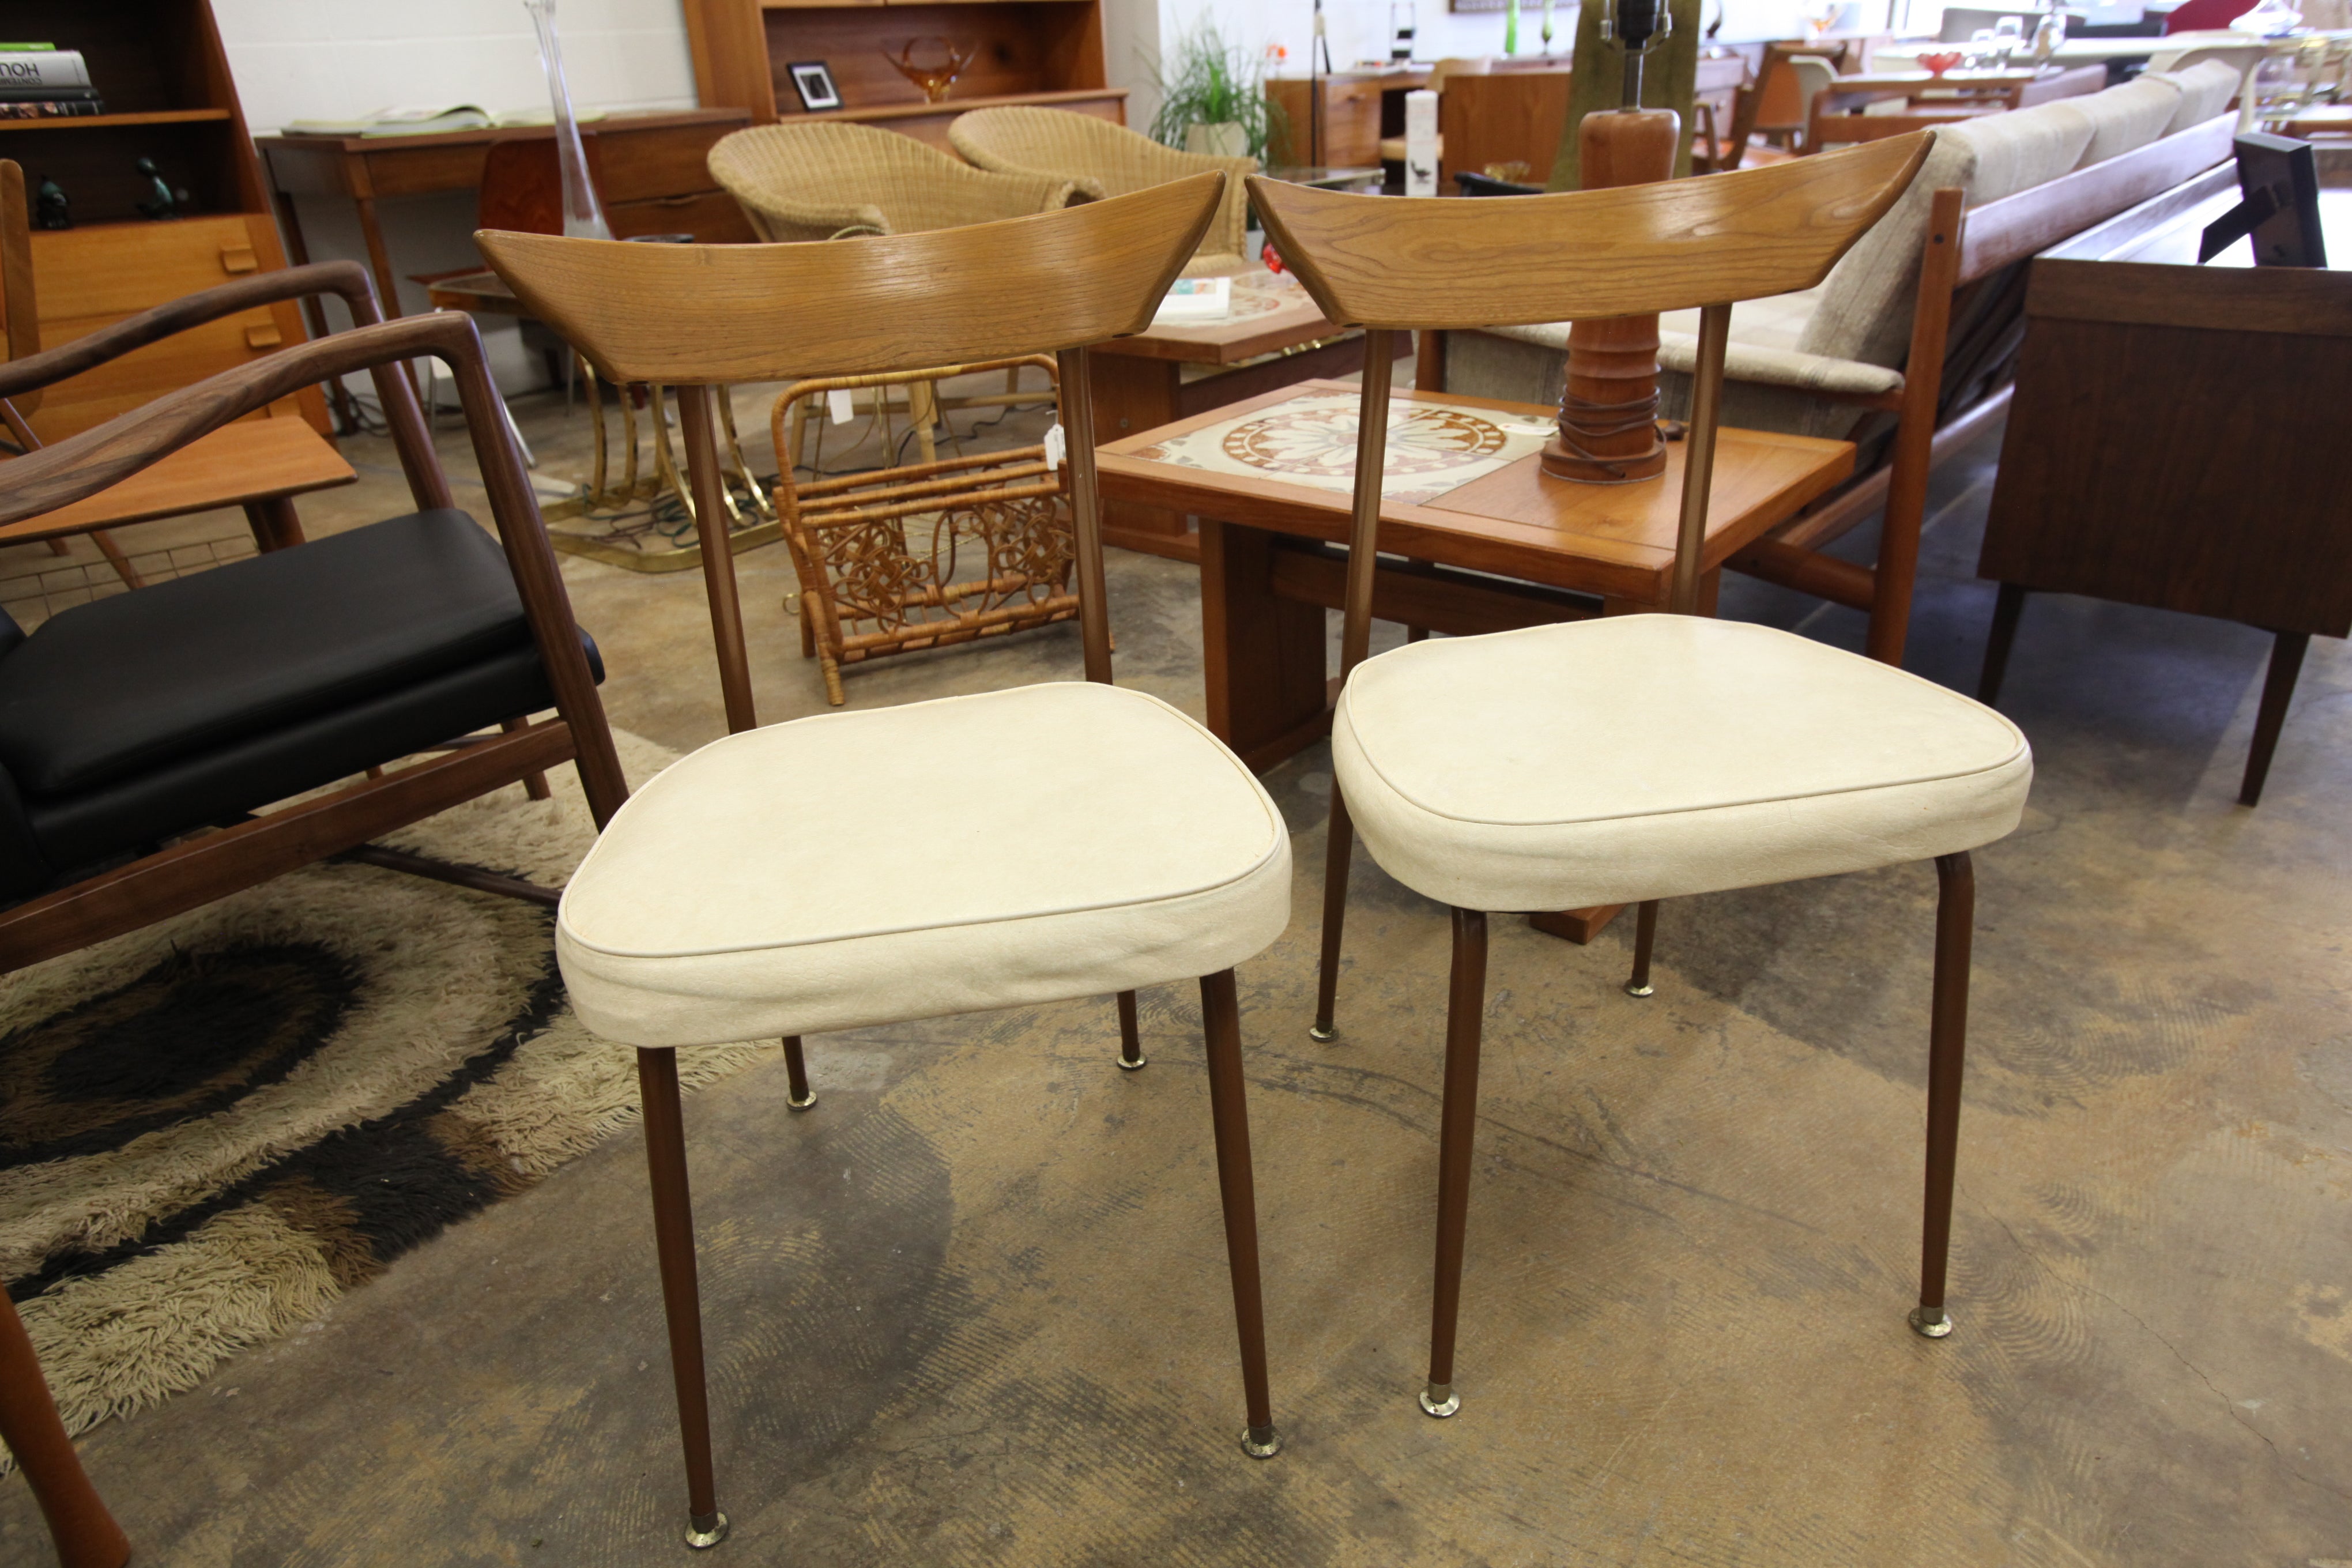 Set of 2 Funky Vintage Kitchen Chairs w/ Wood Backs and Vinyl Seats